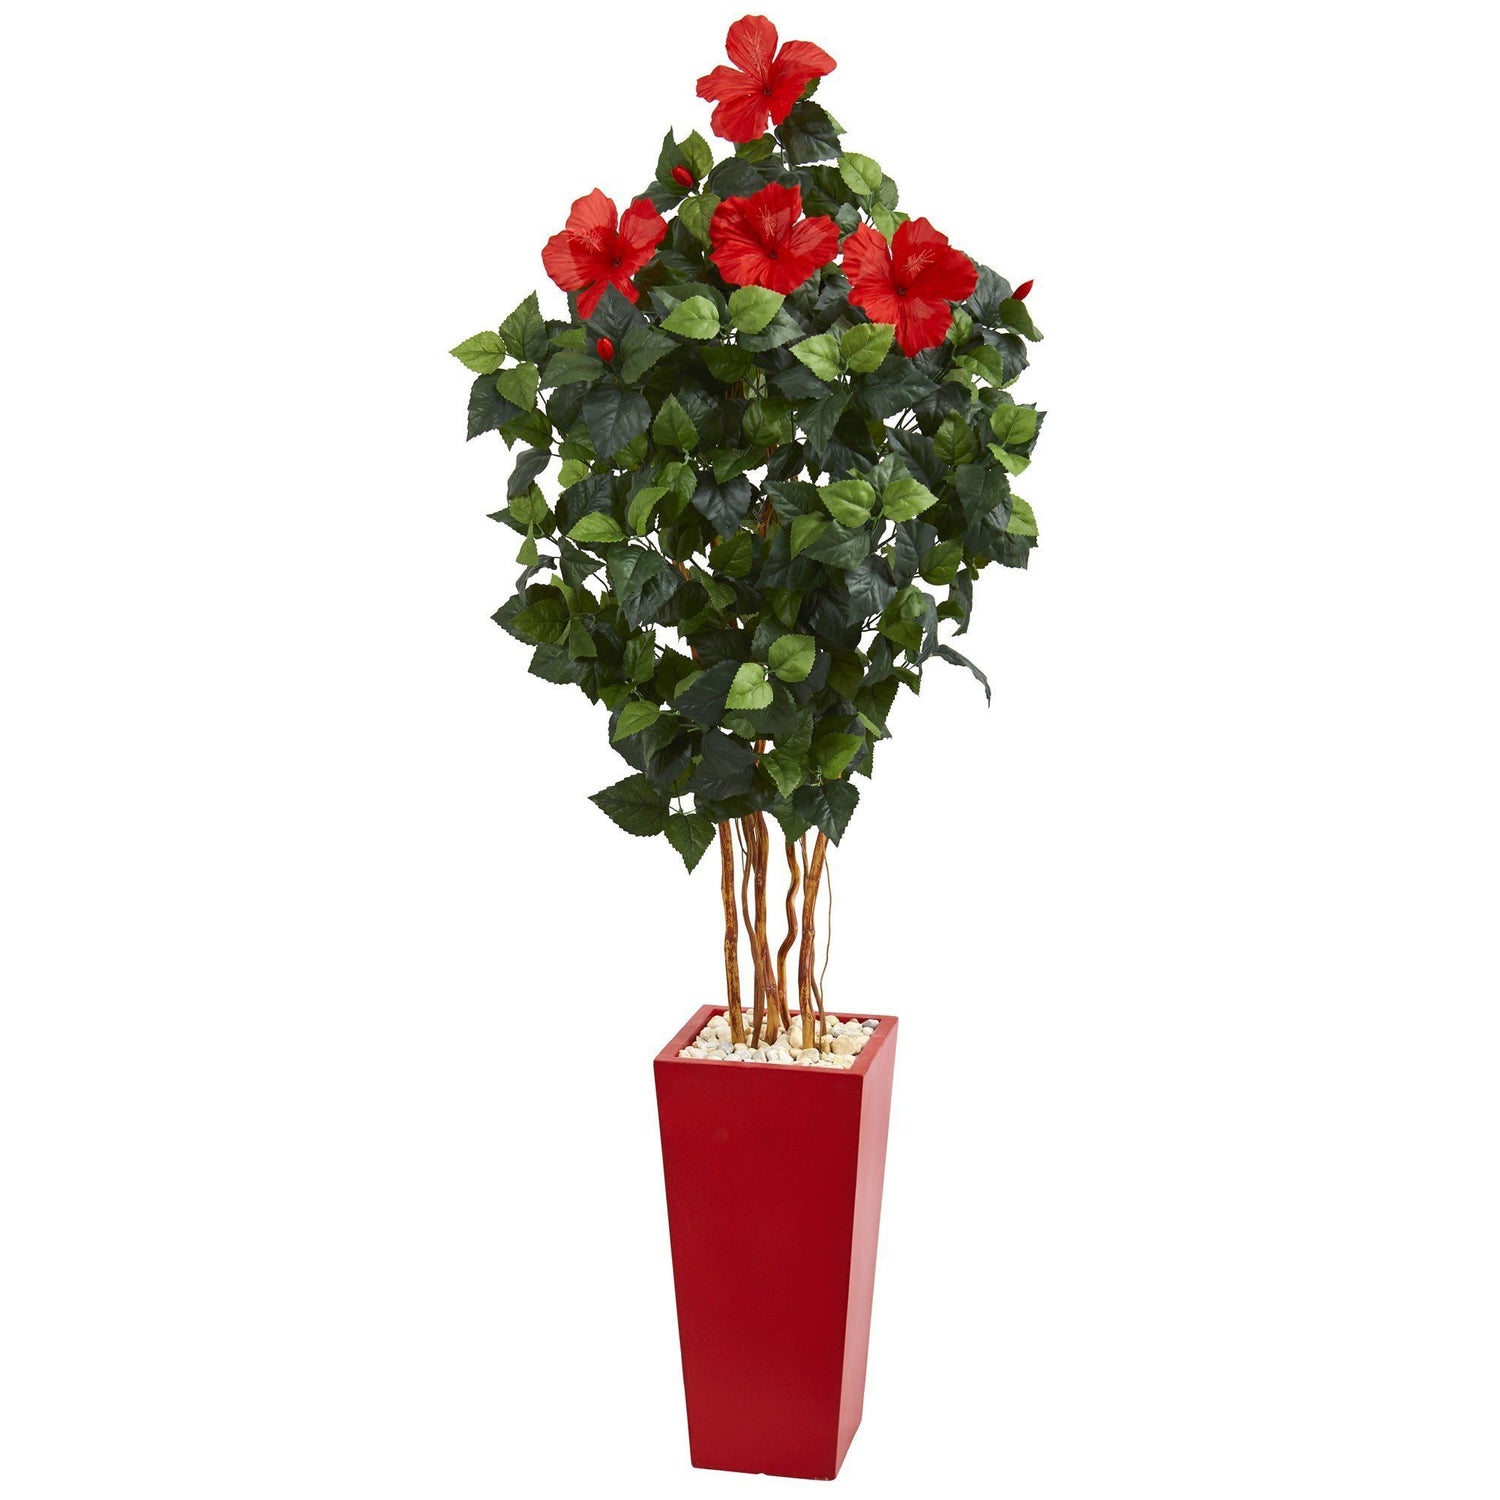 5.5’ Hibiscus Artificial Tree in Red Tower Planter